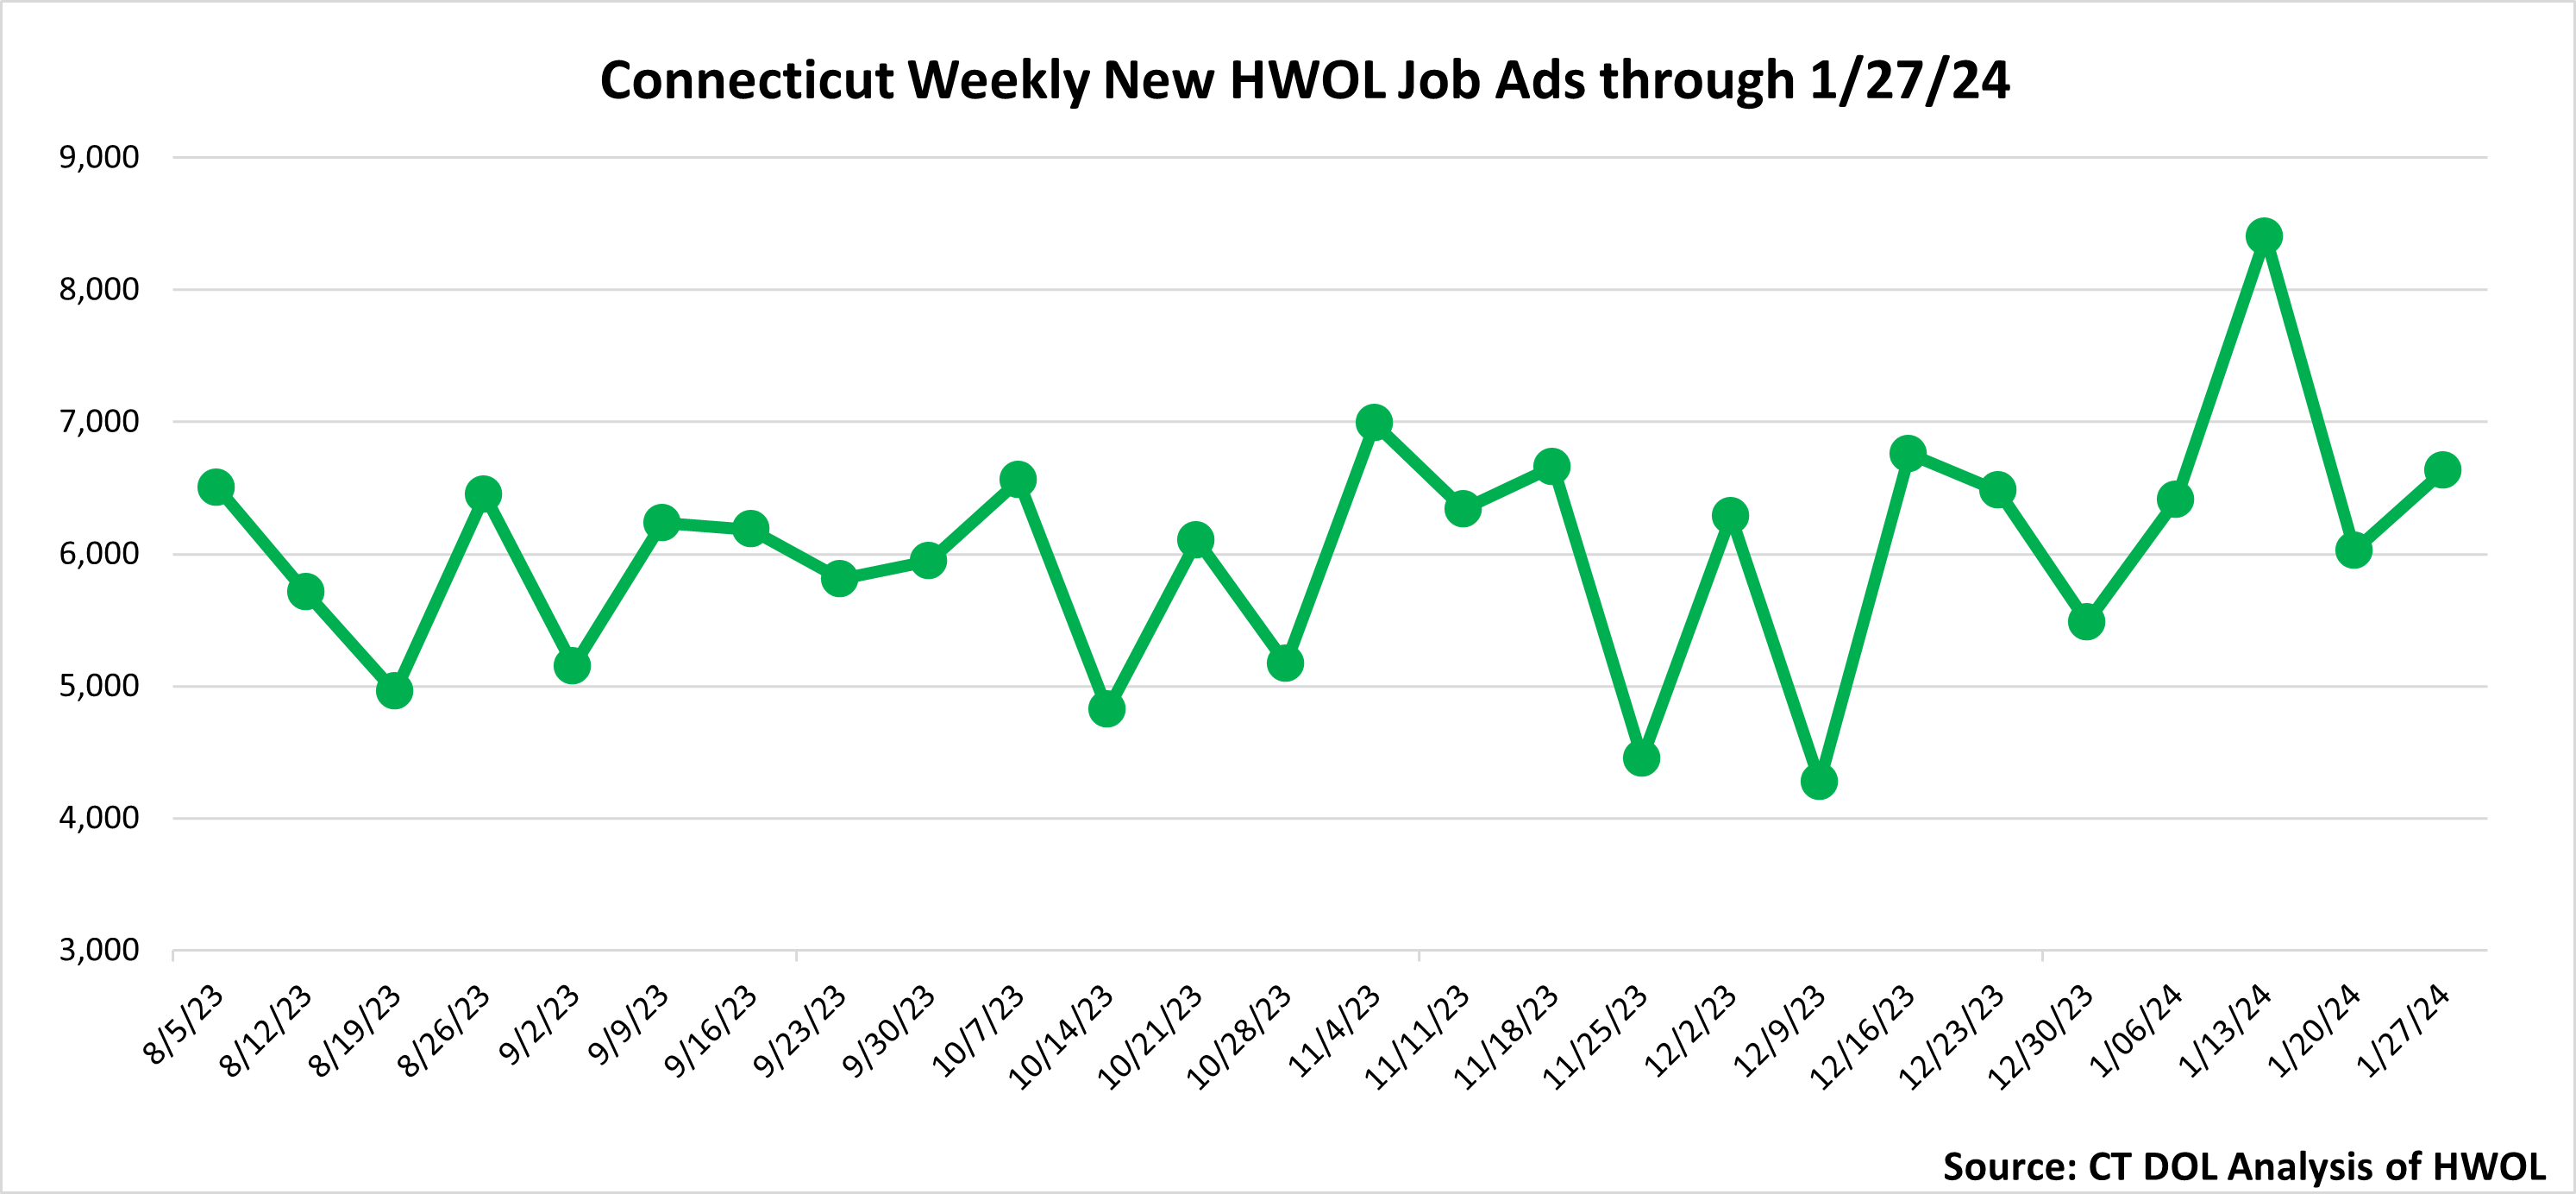 Connecticut Weekly Statewide New HWOL Job Ads through 1/27/24